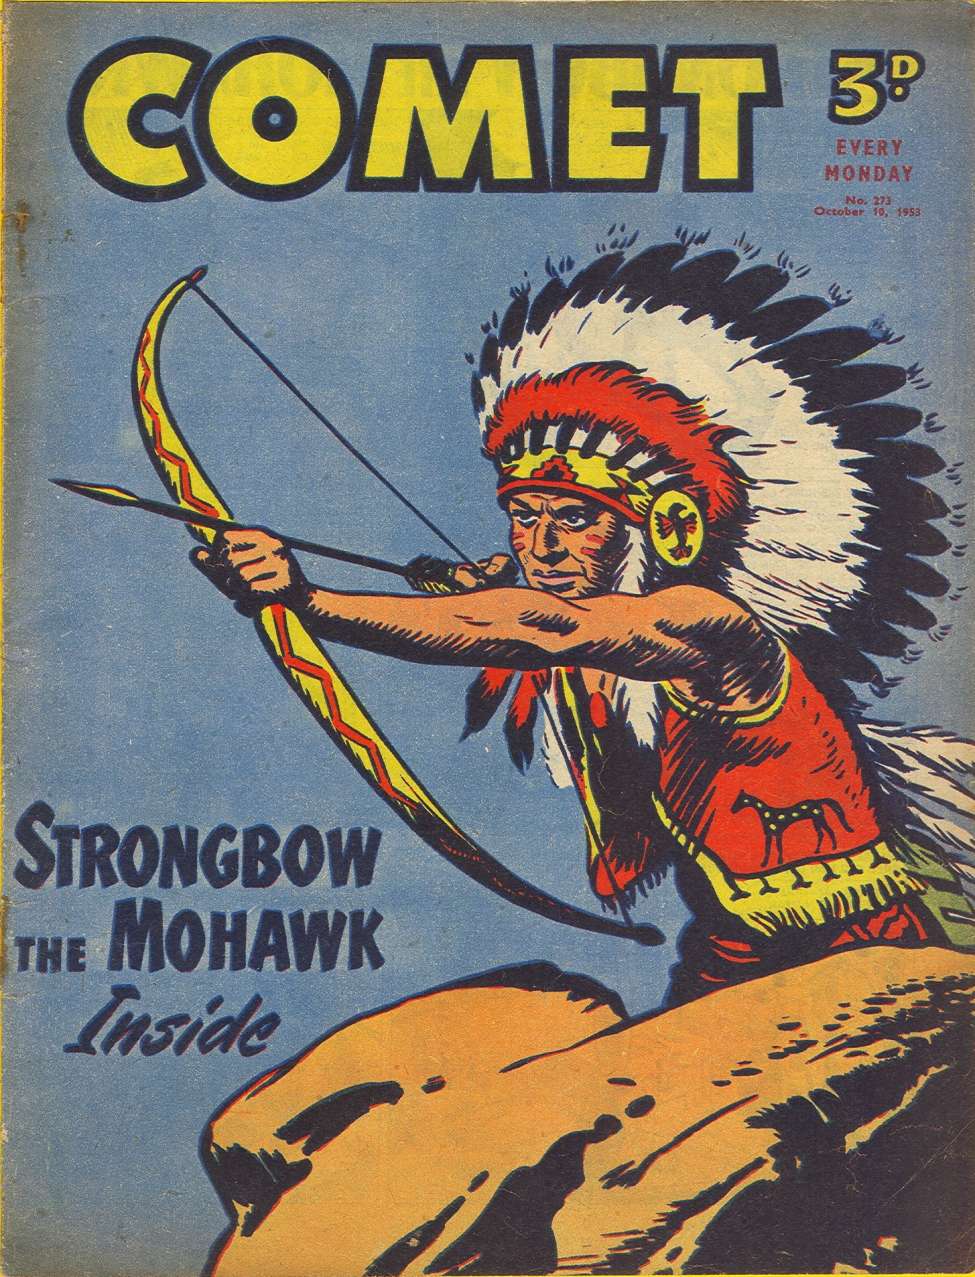 Book Cover For The Comet 273